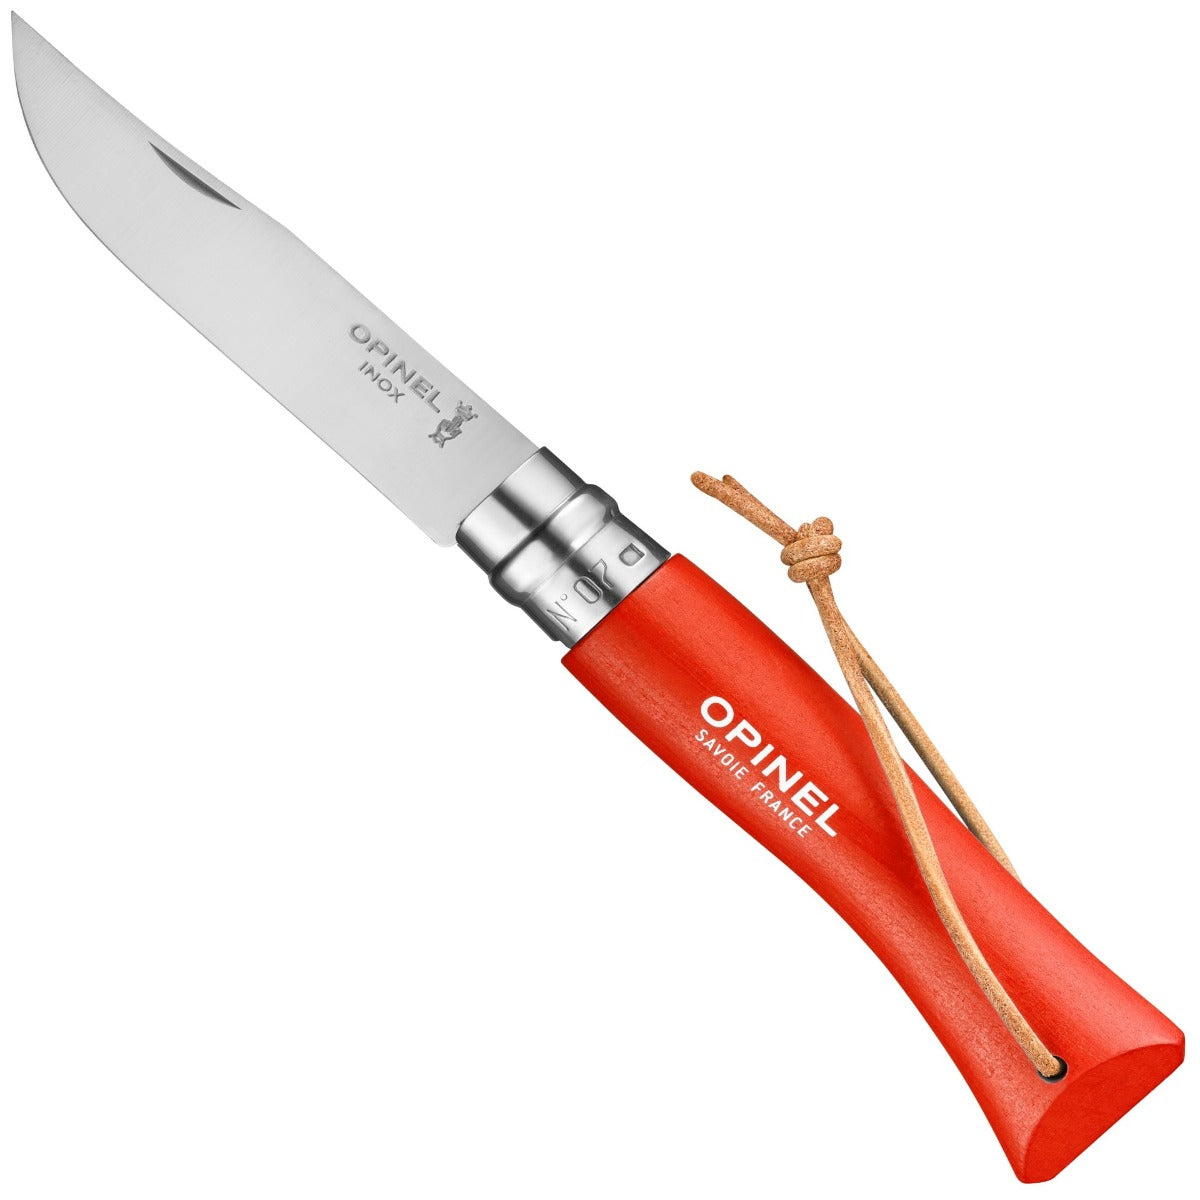 Opinel No. 7 Colorama Stainless Folding Knife (Orange) - Apple Valley Emporium